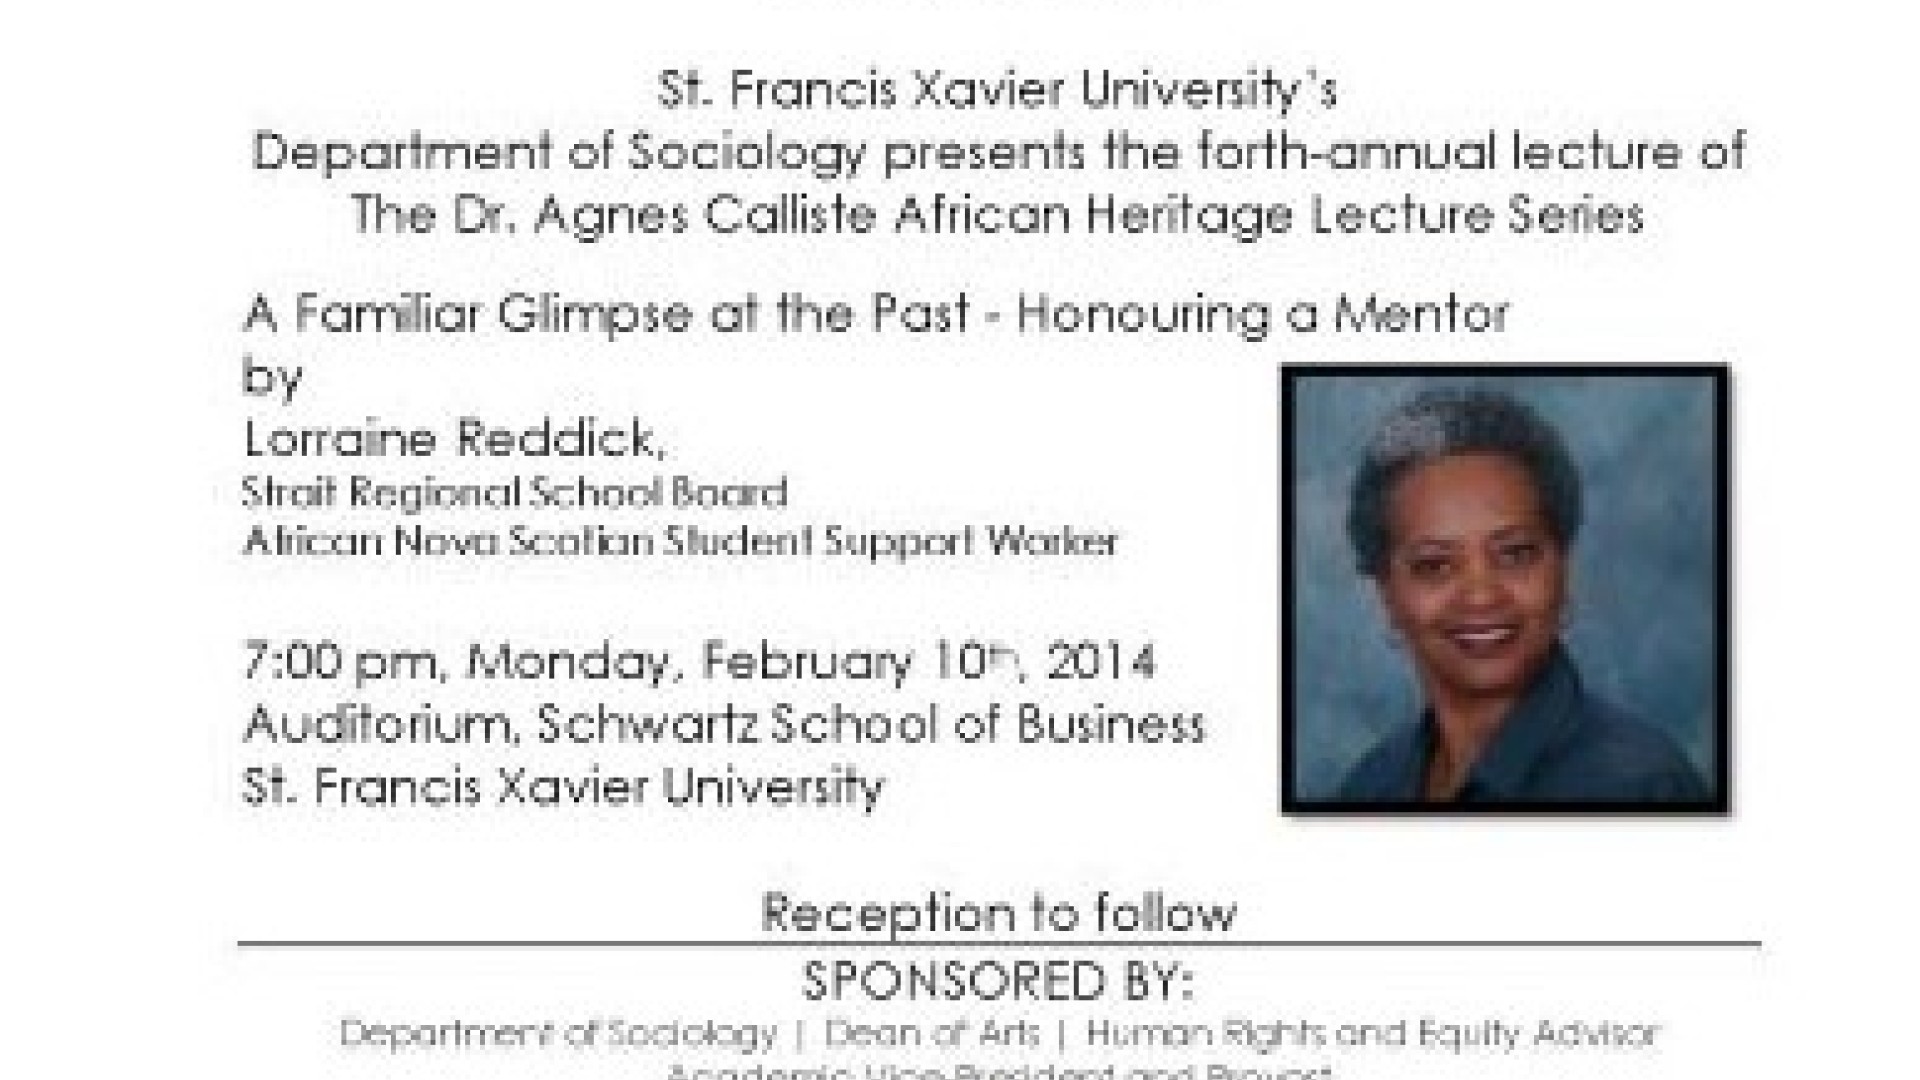 Poster: A Familiar Glimpse of the Past - Honouring a Mentor featuring Larraine Reddick